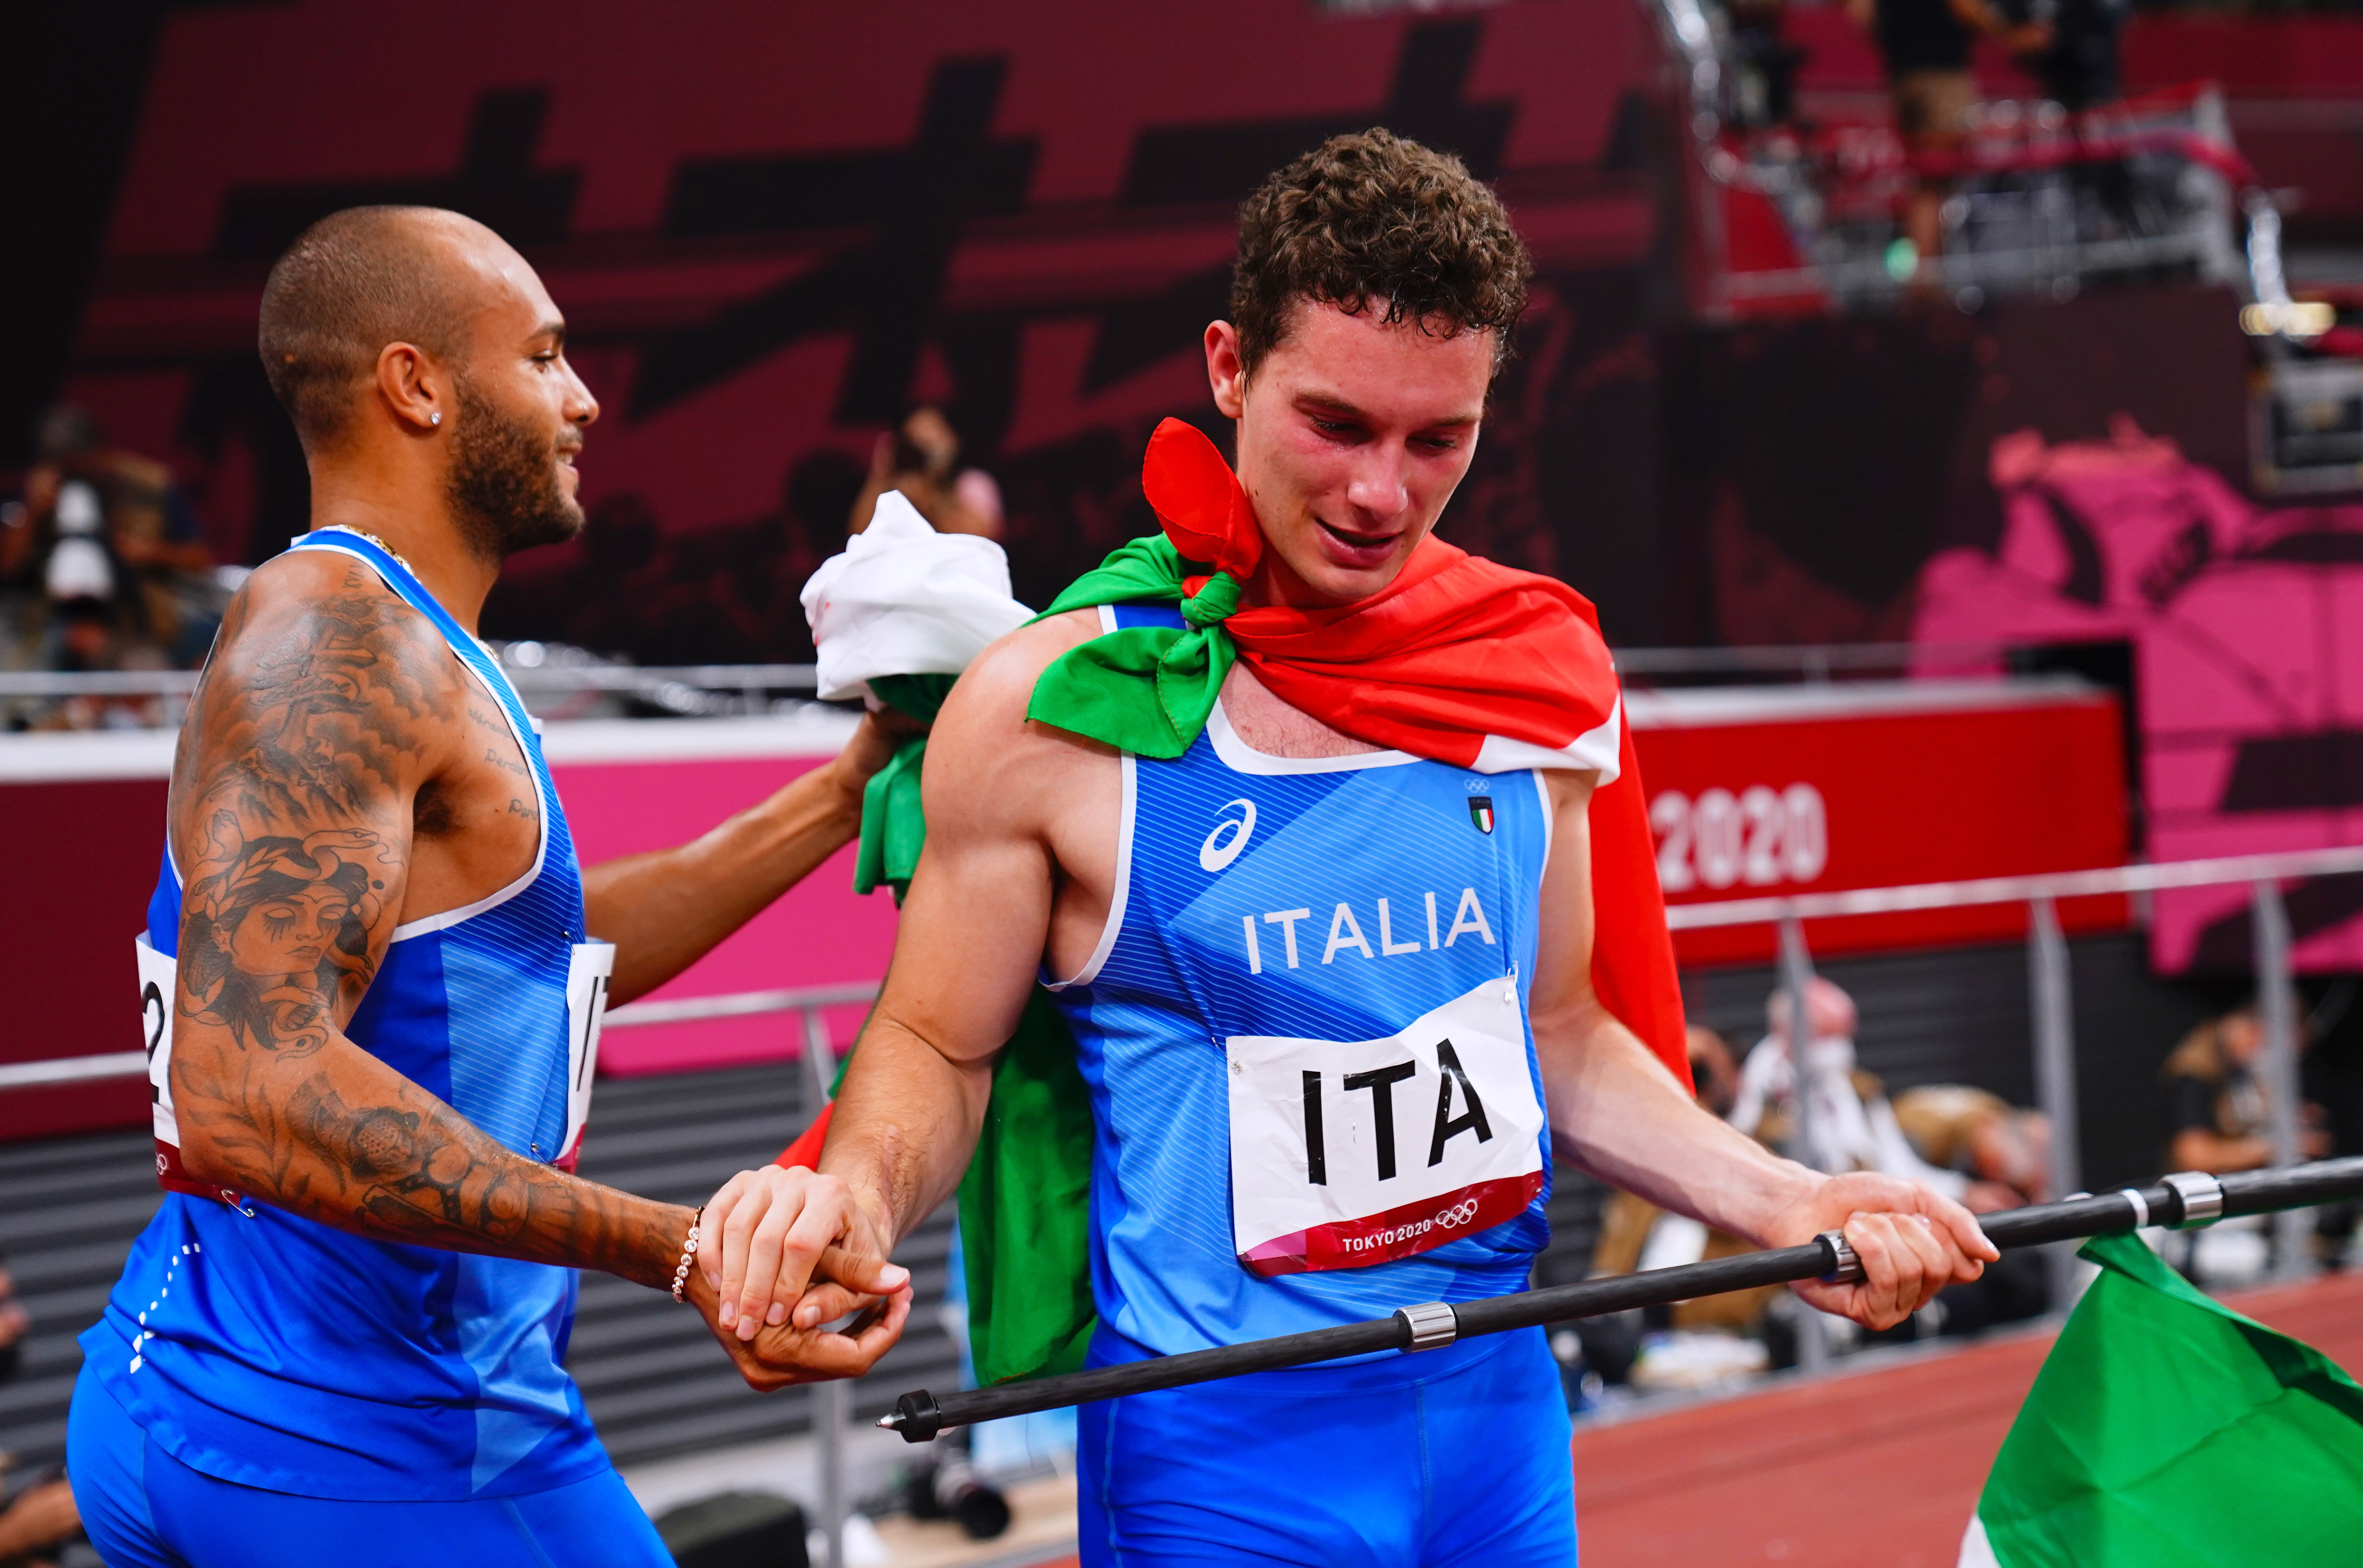 Tokyo 2020 Olympics - Athletics - Men's 4 x 100m Relay - Final - Olympic Stadium, Tokyo, Japan - August 6, 2021.  Lamont Marcell Jacobs of Italy and Filippo Tortu of Italy celebrate after winning gold REUTERS/Aleksandra Szmigiel